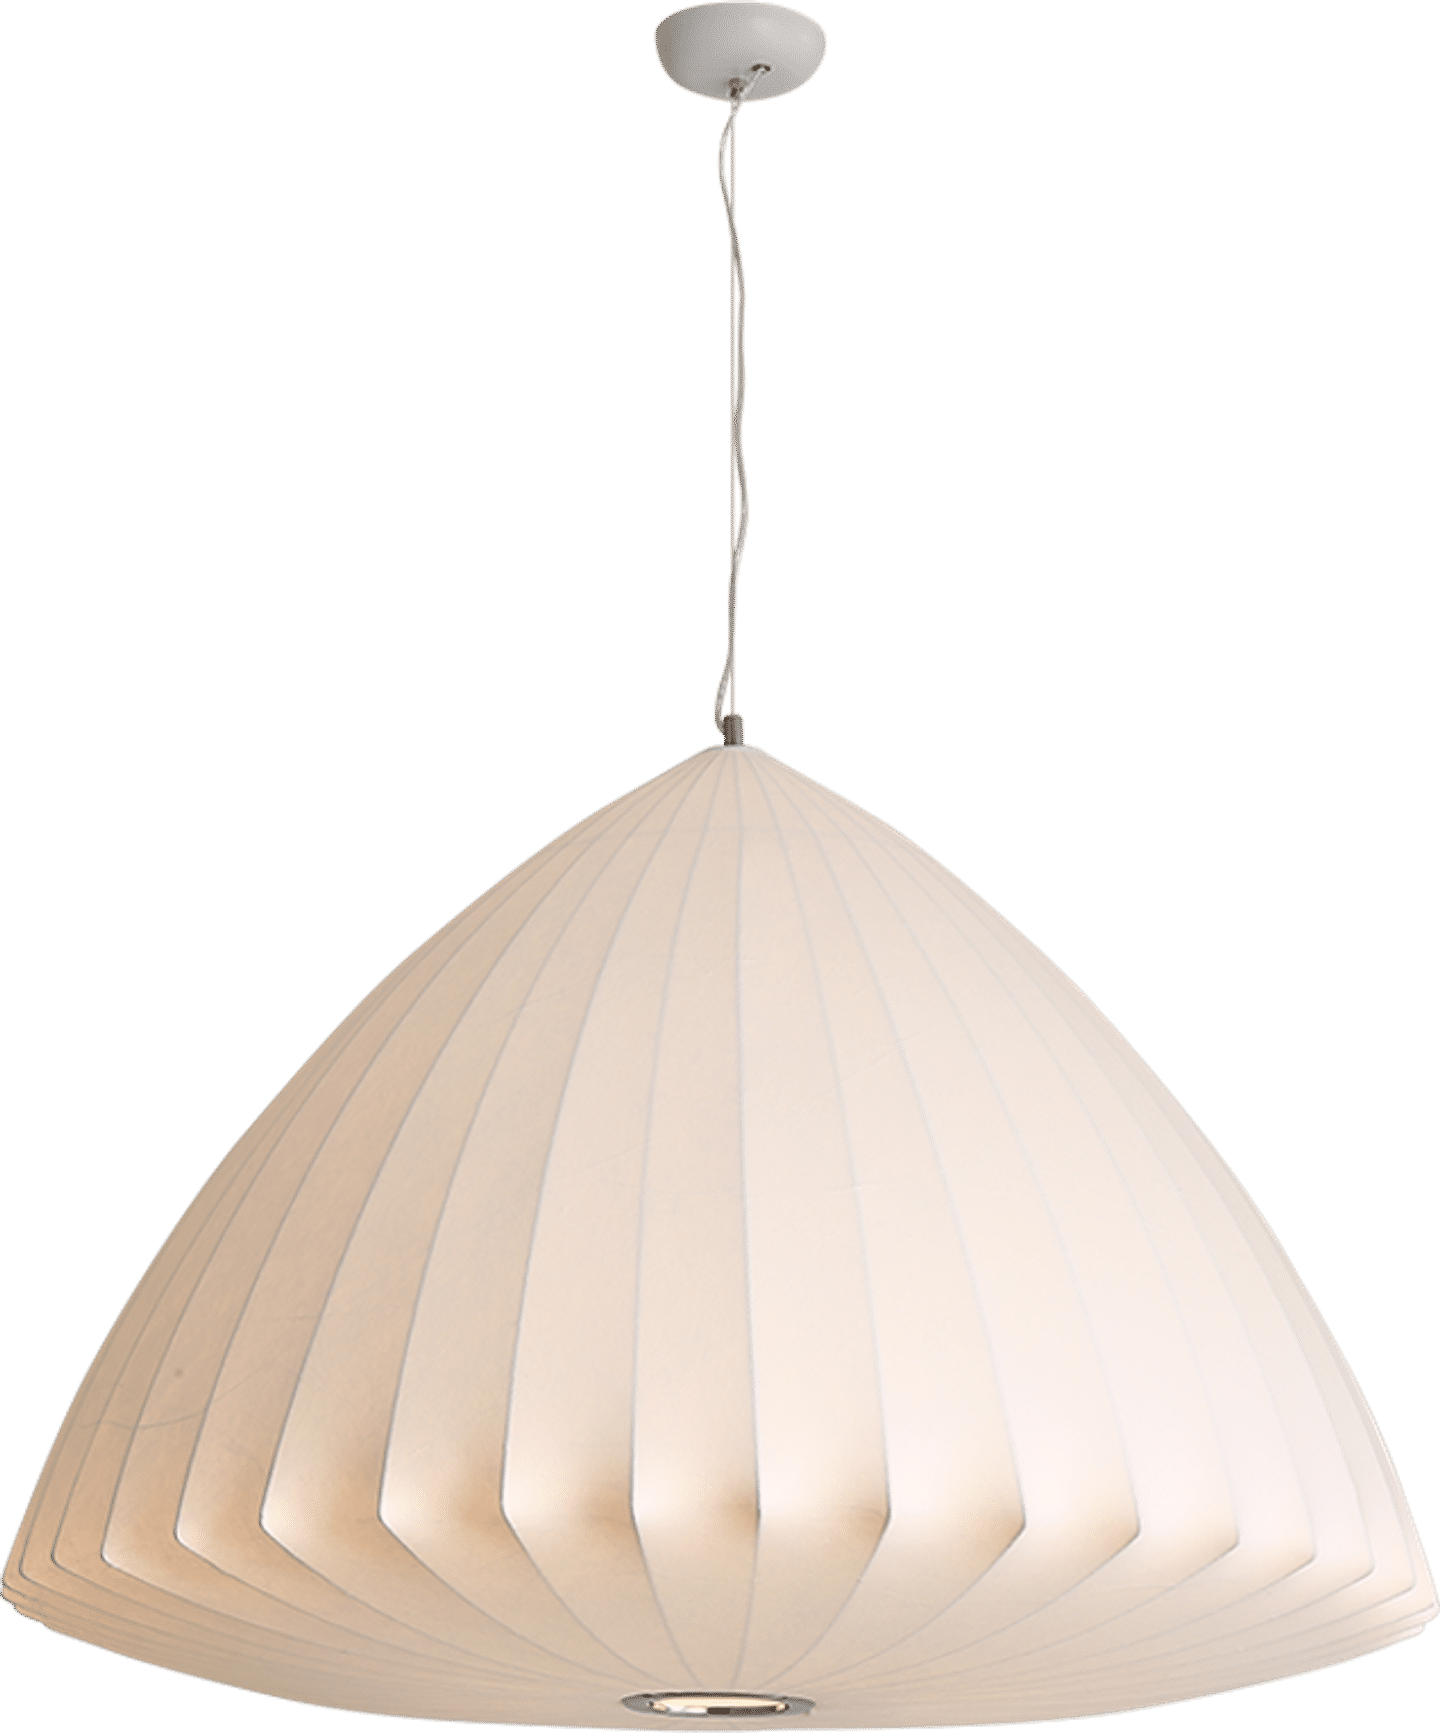 Bubble Bell Hanglamp White image.